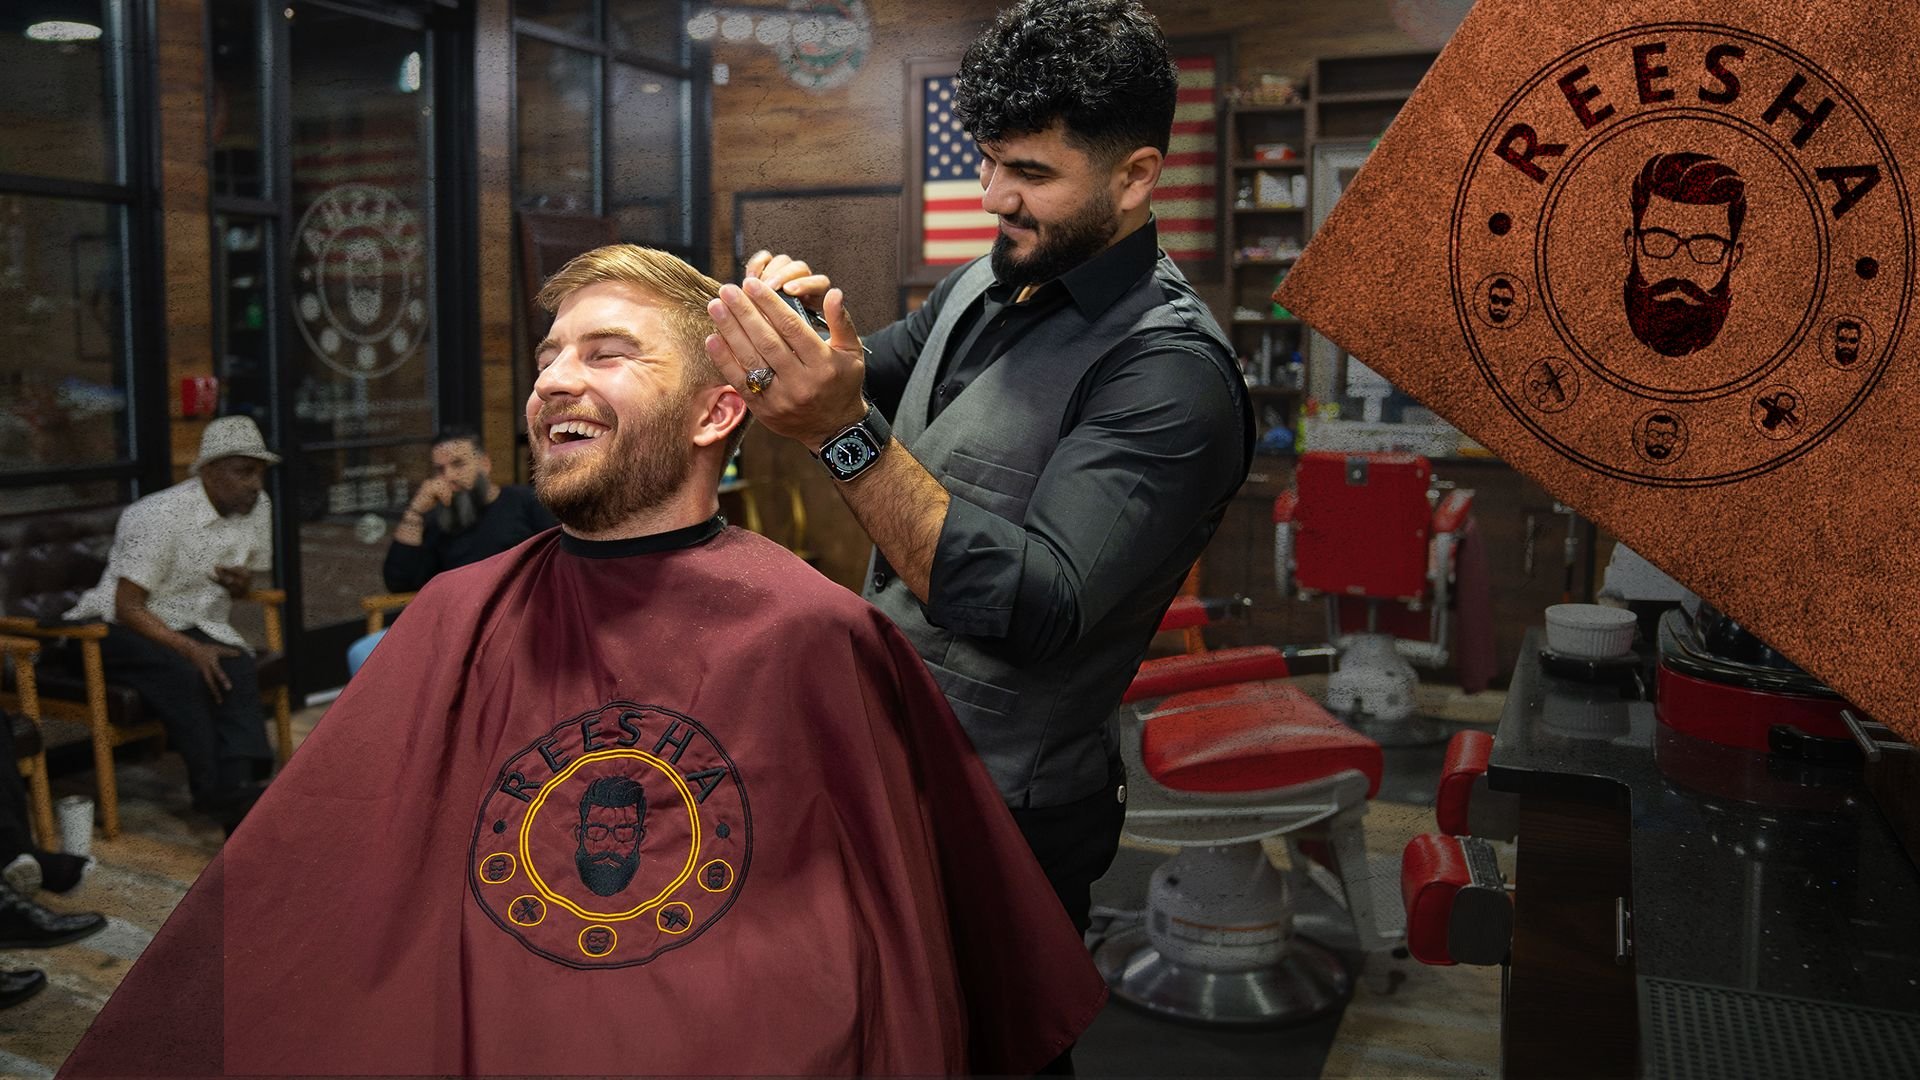 Looking for the best haircut &amp; shave in Milton? Look no further than @reeshabarbers.  Whether you need a business haircut, high and tight, flattop, or a kids cut, Reesha Barber Shop will take good care of your grooming needs.

#mensgrooming #barb